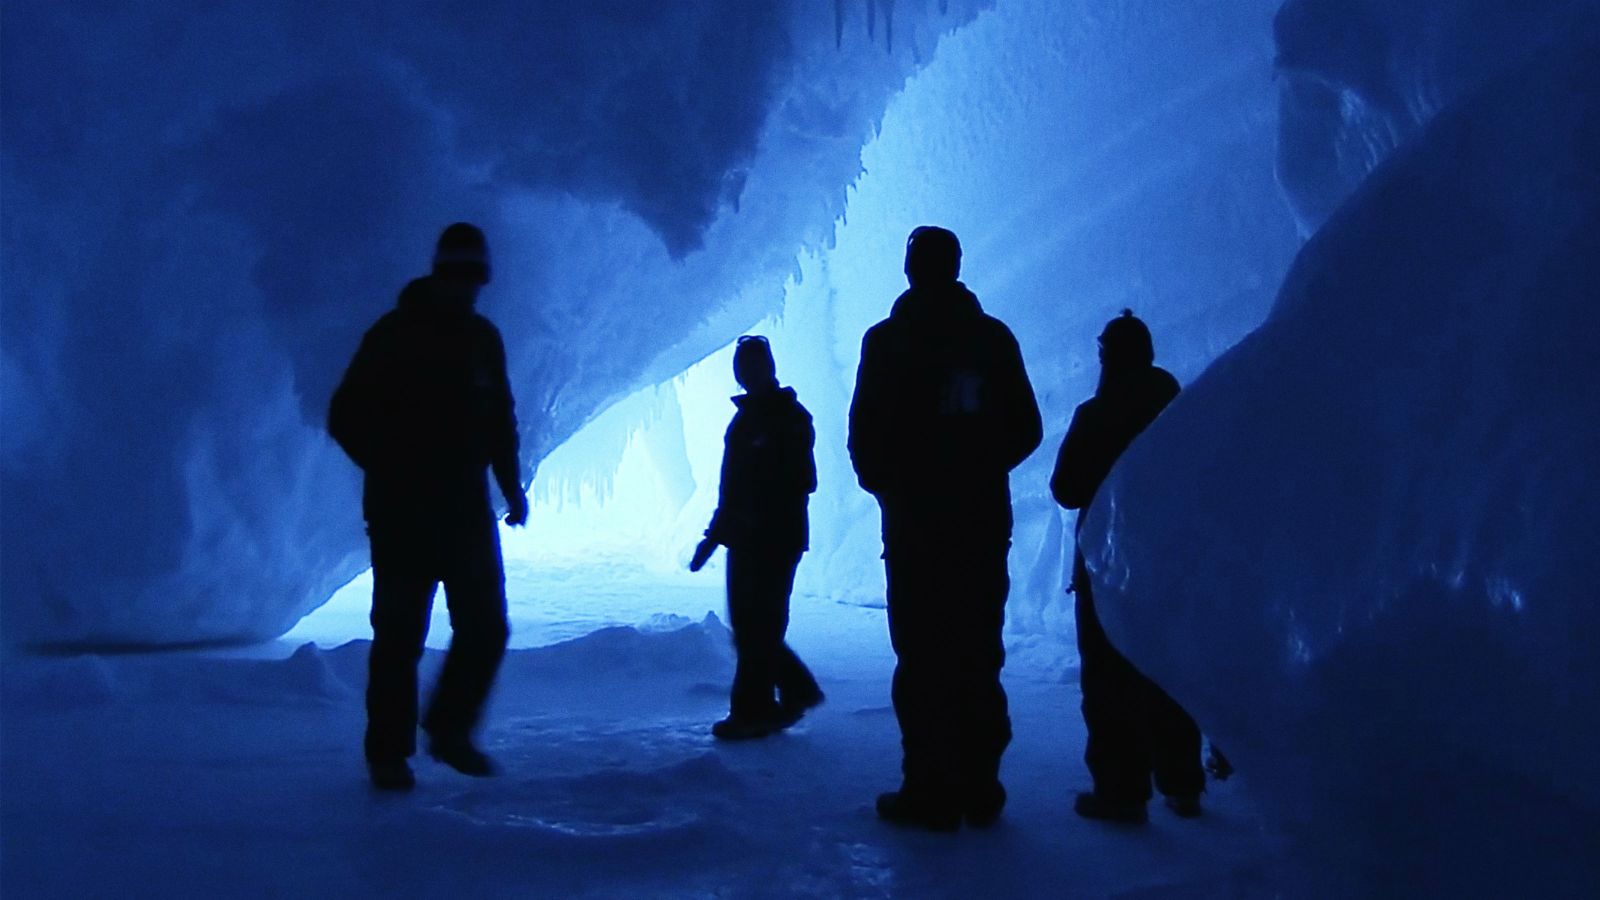 Solid black human silhouettes explore an intensely blue ice cave.